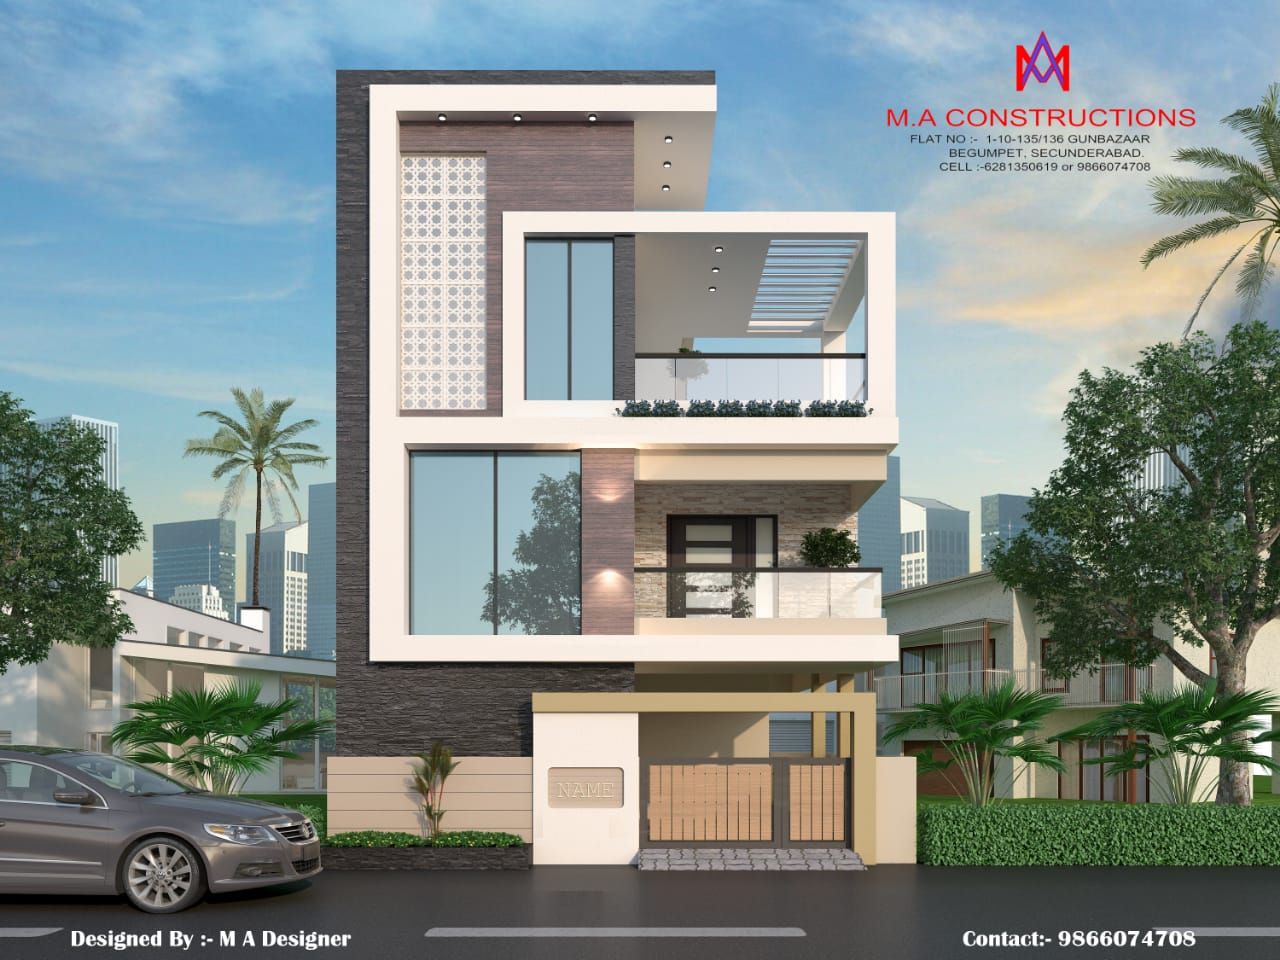 Exteriors and Architectural , M.A Constructions M.A Constructions Azjatyckie domy